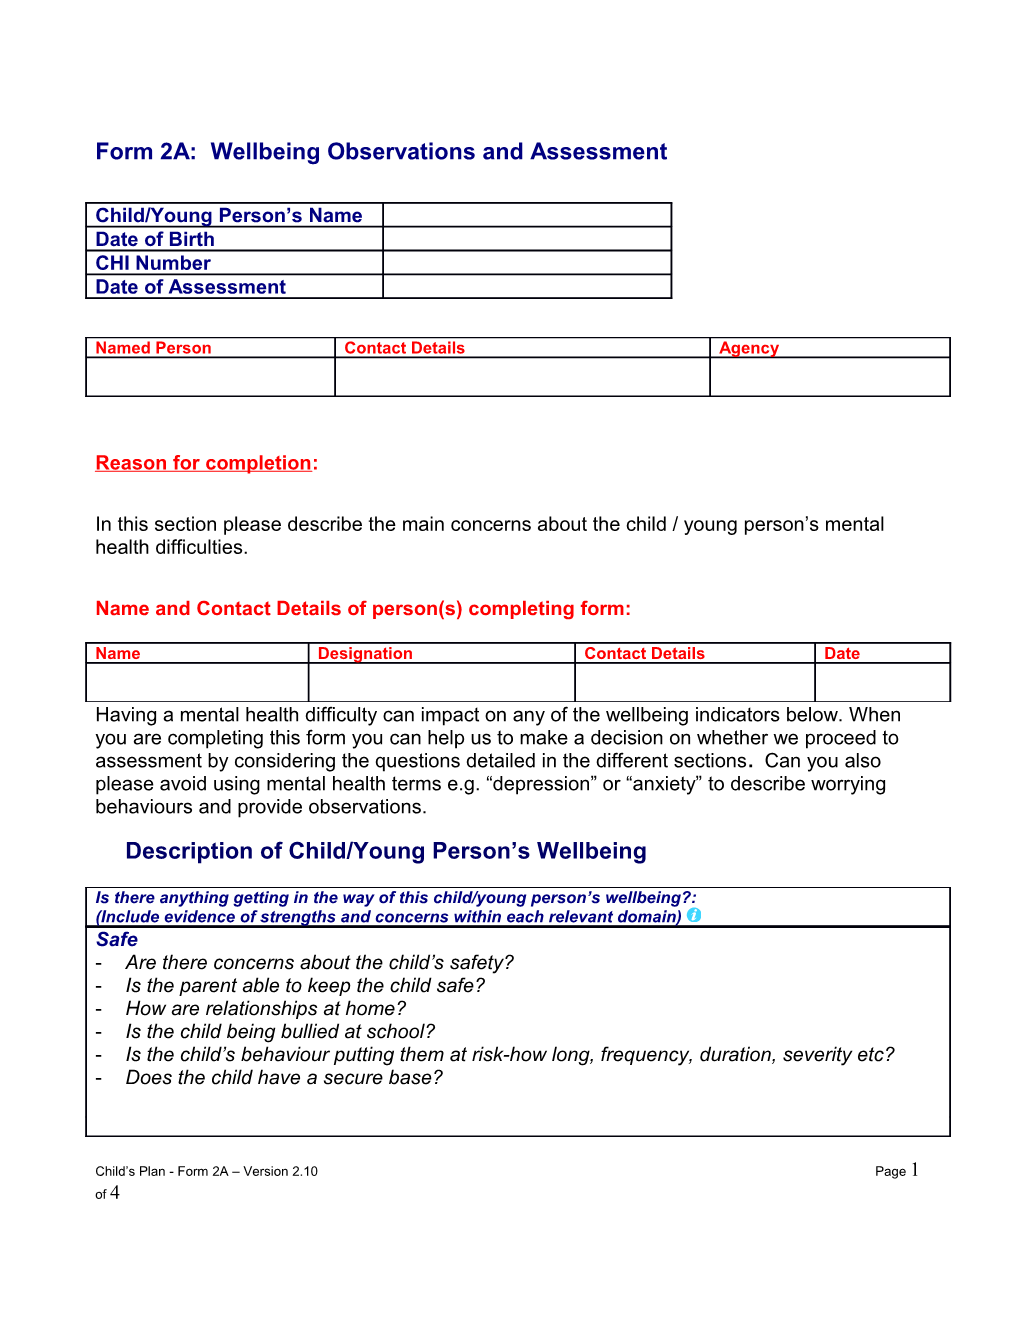 Form 2: Initial Assessment Form